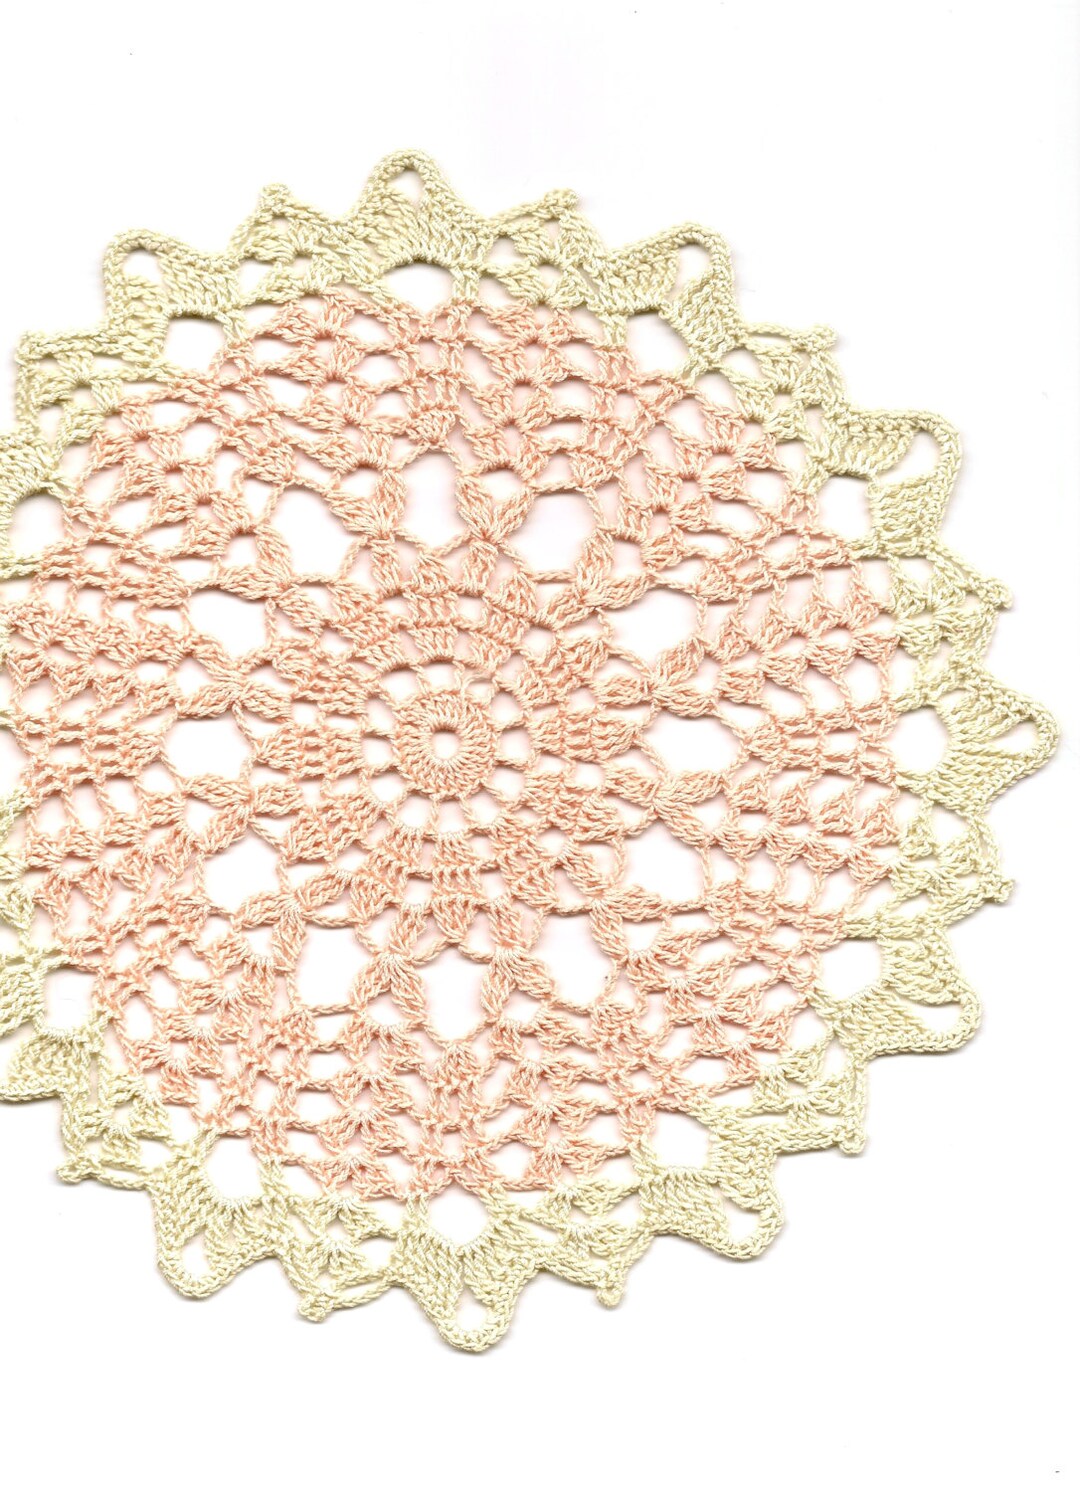 Crochet Doily Lace Doilies Table Decoration Crocheted Doily - Etsy